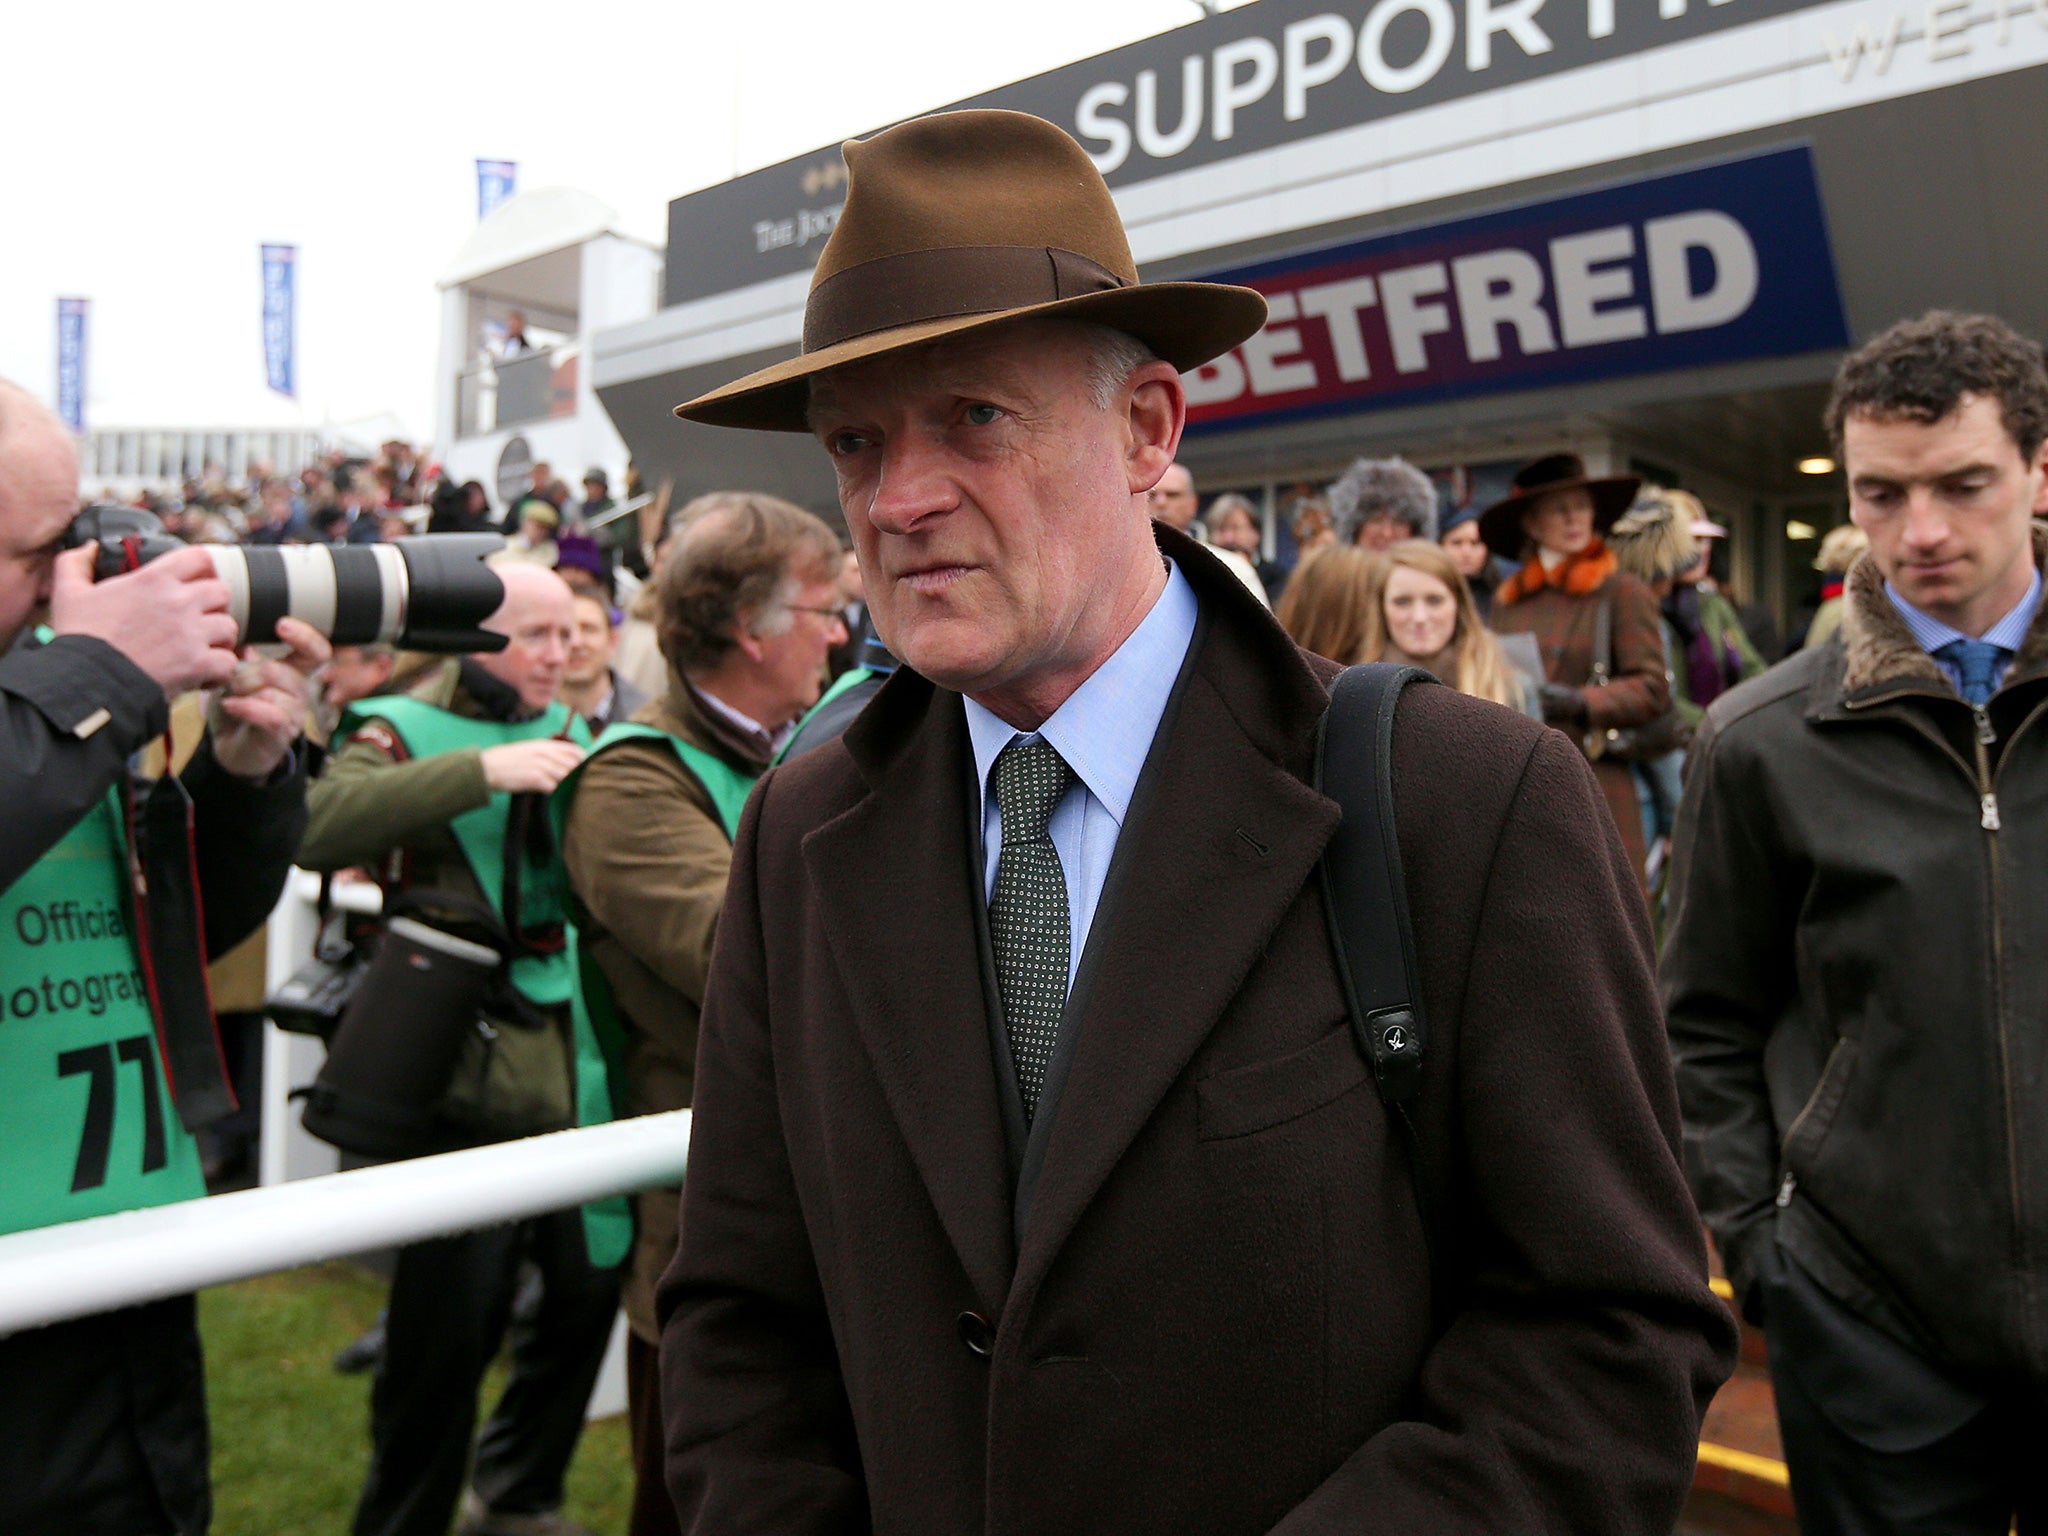 Willie Mullins brought up a record eight wins at the fixture with two more victories